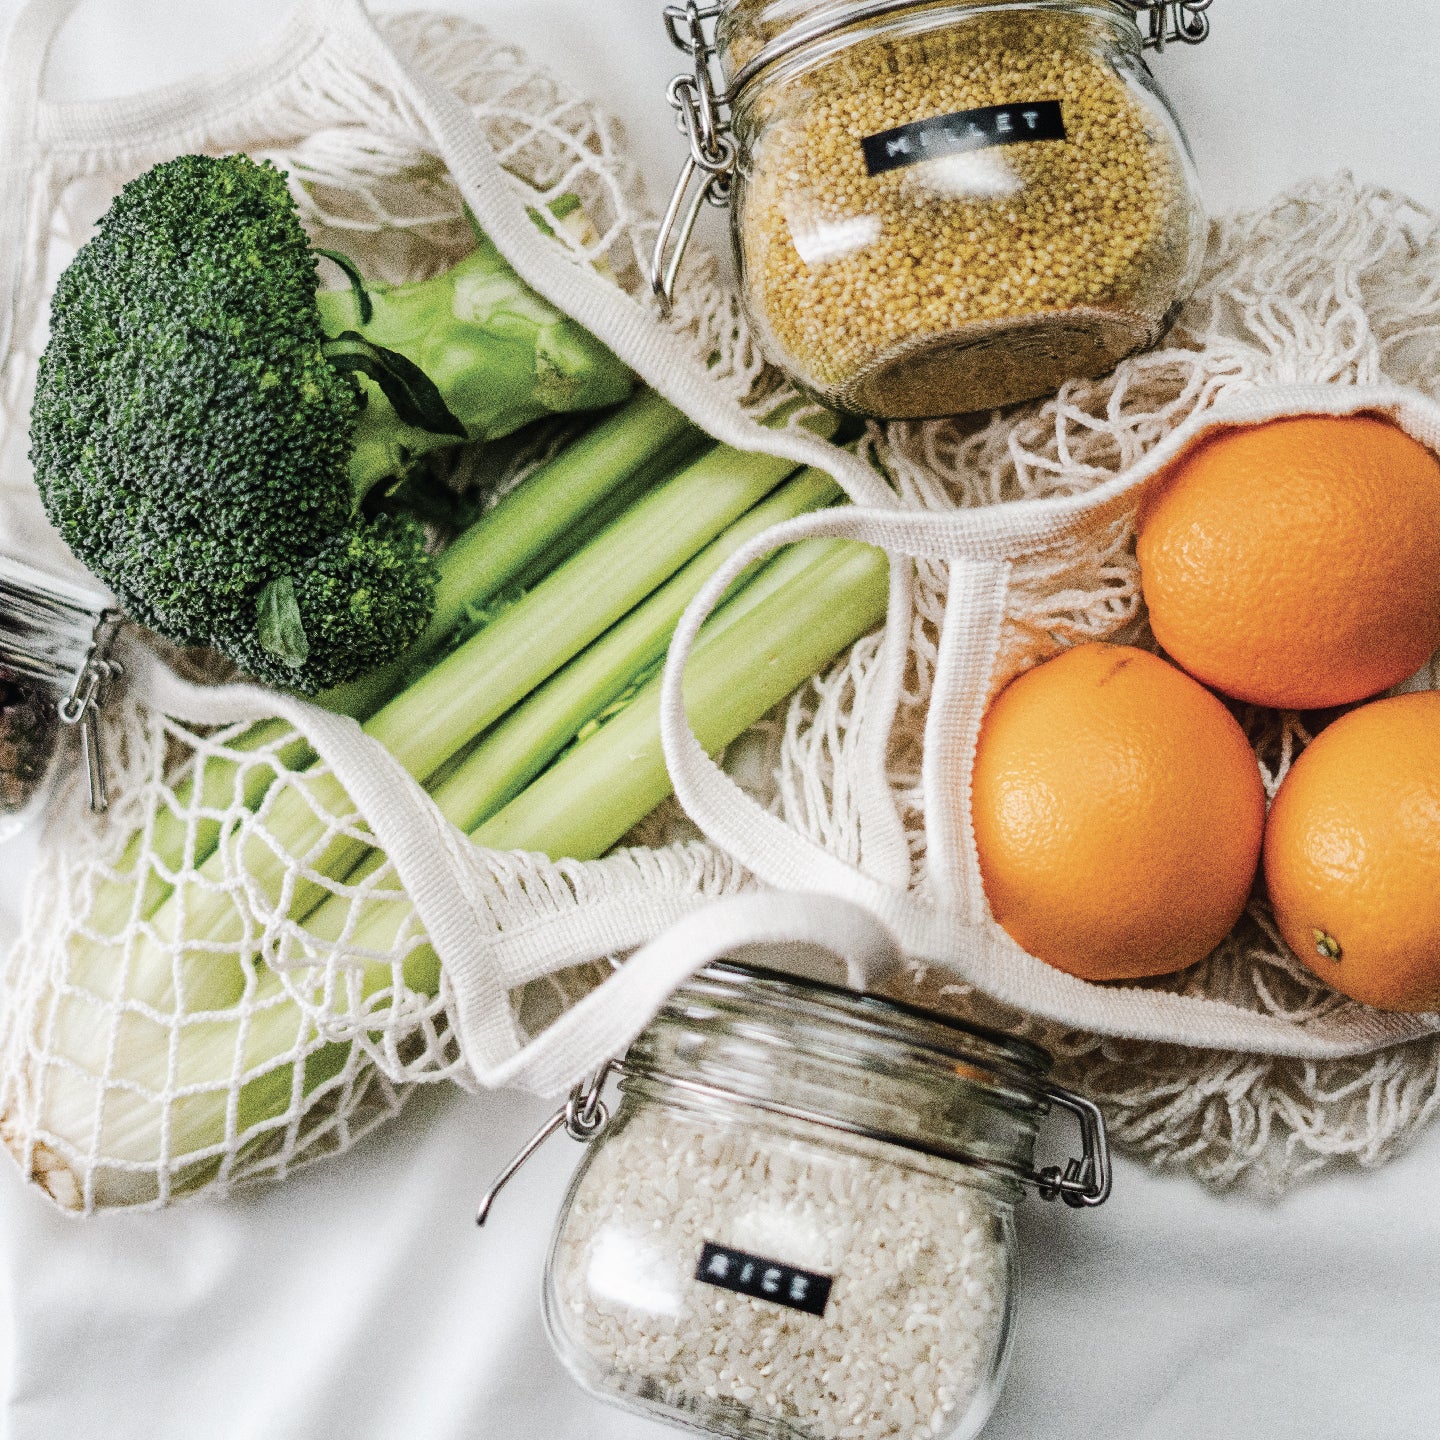 Sustainably packaged food. Bulk ingredients in glass jars, and produce in woven natural fibre produce bags.